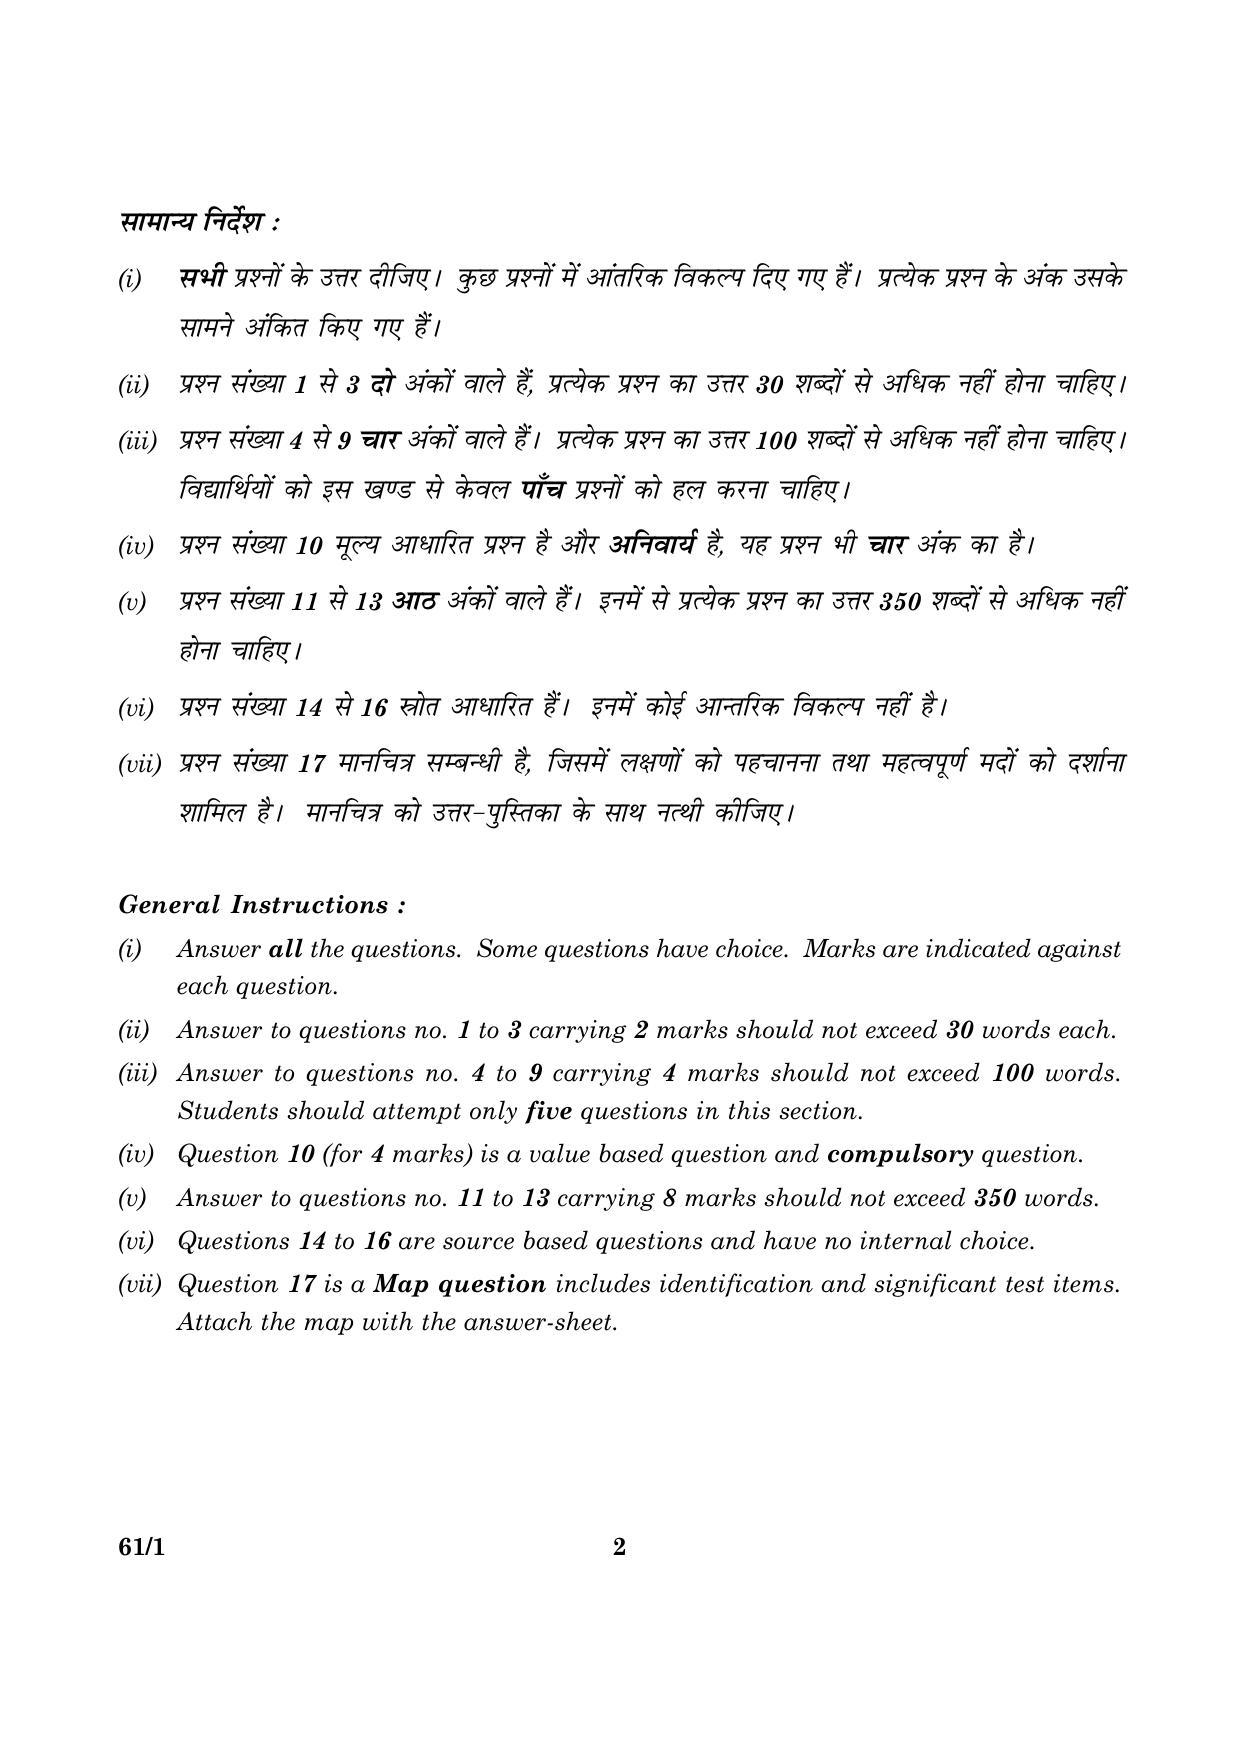 CBSE Class 12 061 Set 1 History 2016 Question Paper - Page 2